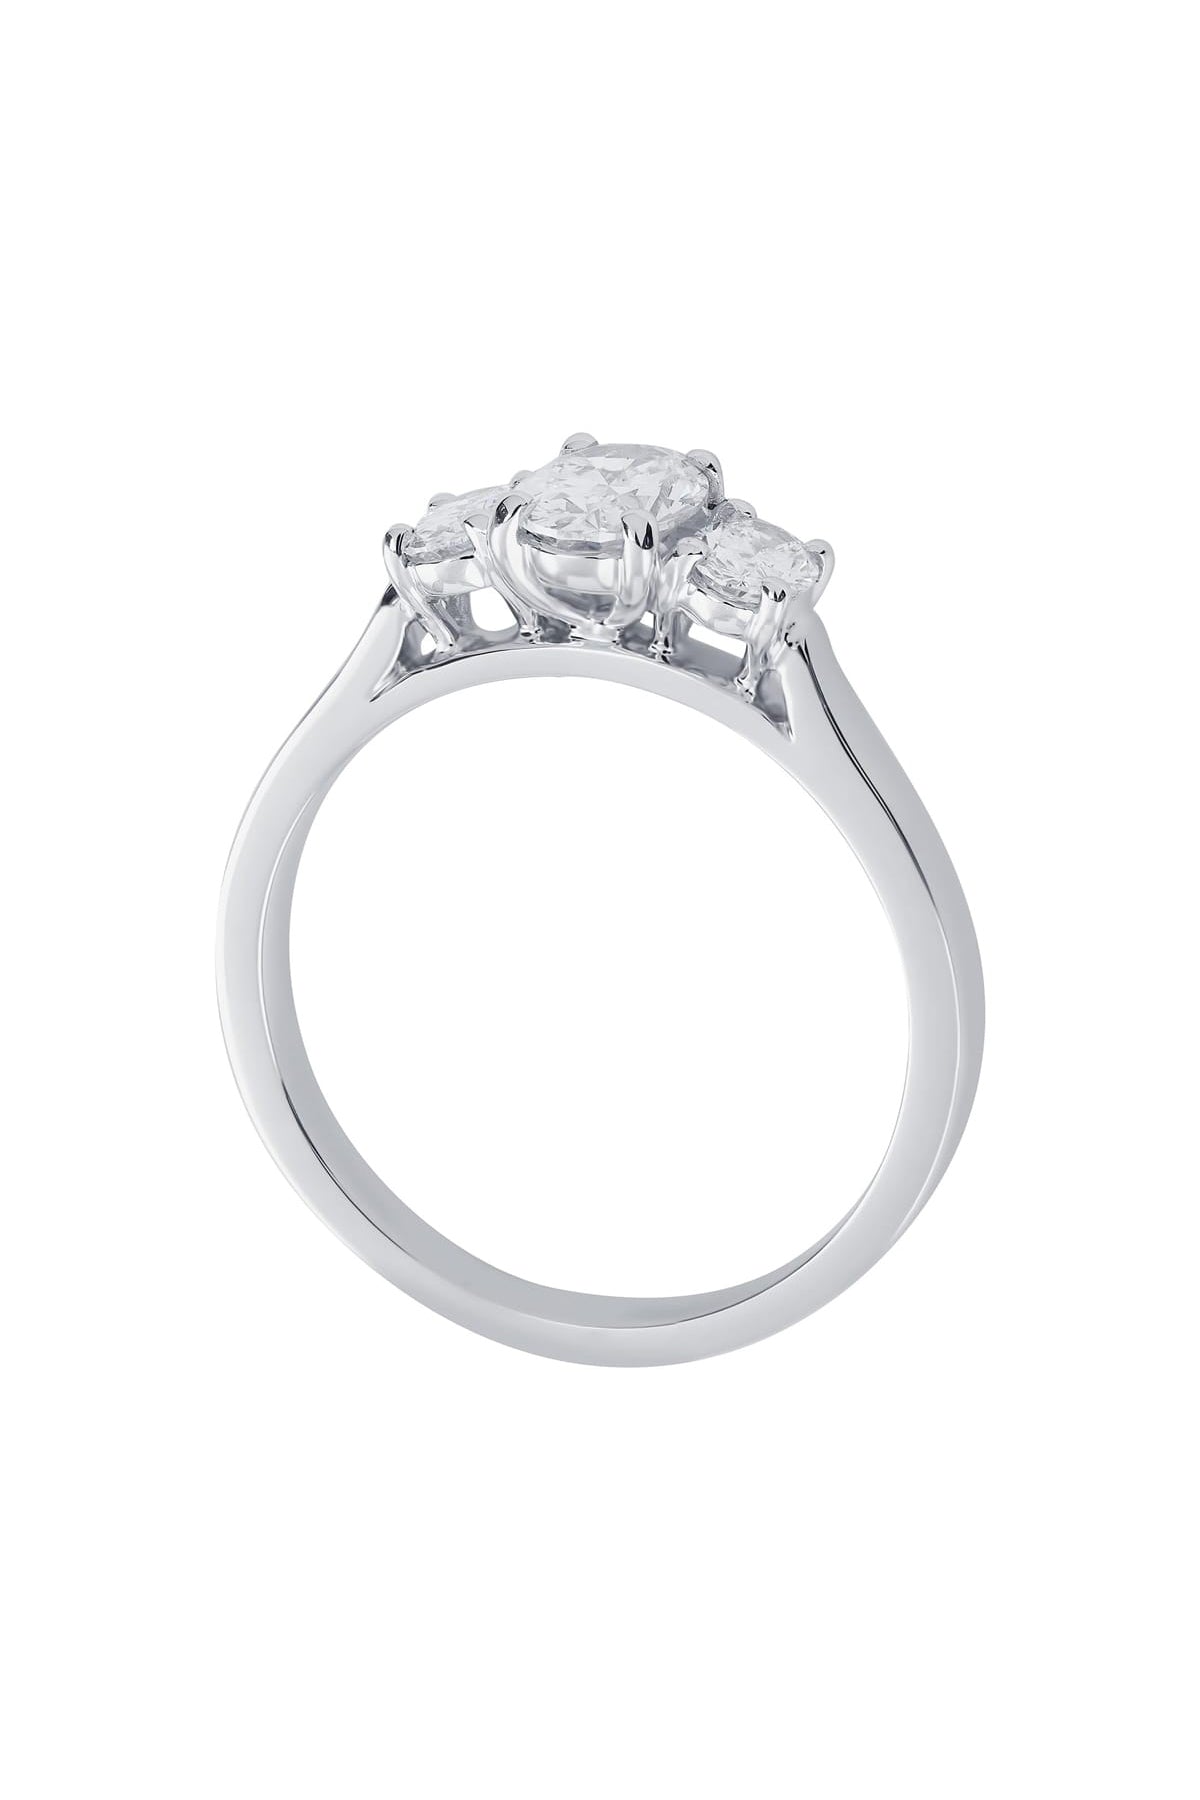 1.00ct Oval Diamond Ring set in 18ct White Gold available at LeGassick Diamonds and Jewellery Gold Coast, Australia.